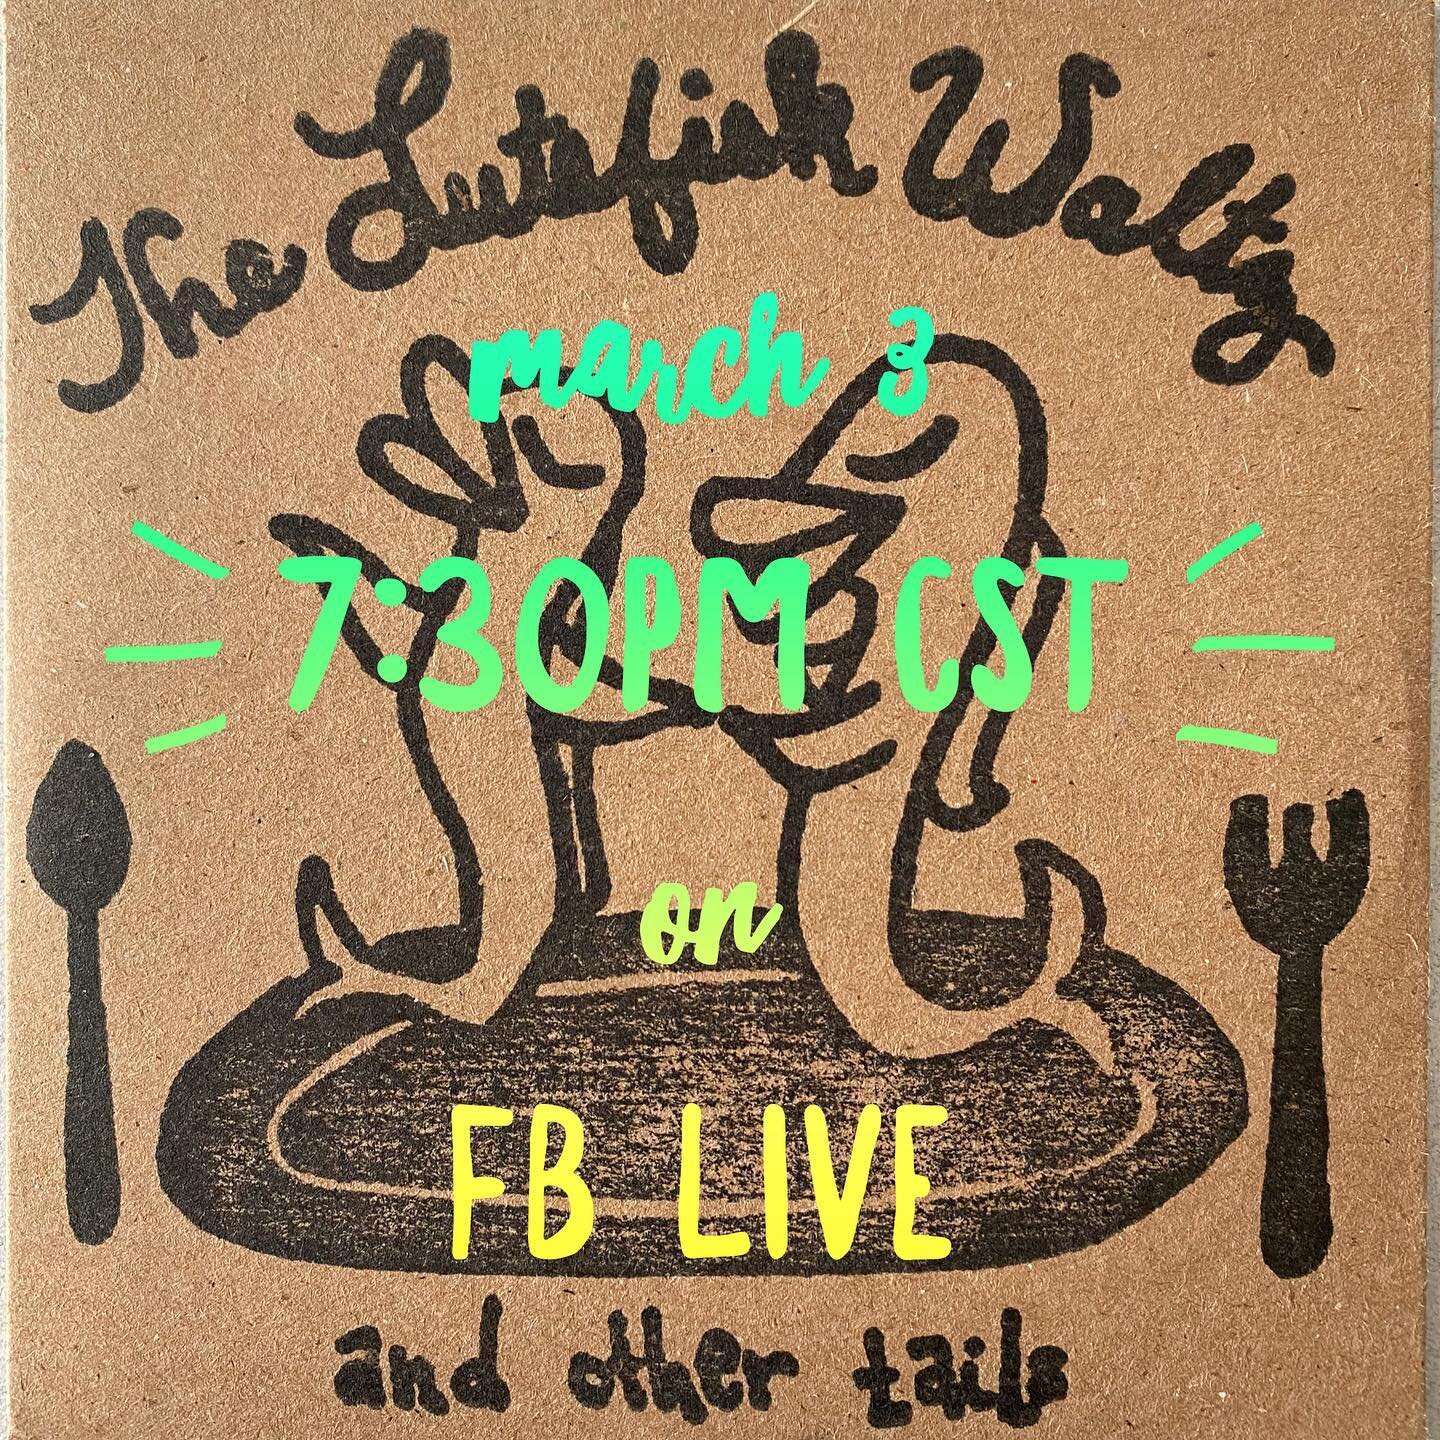 Please join us Wednesday evening on FB Live as we perform the music live and share tales about our second EP, the Lutefisk Waltz and other tails!

#tailsandtales #seewhatididthere #lutefisk #fendrickandpeck